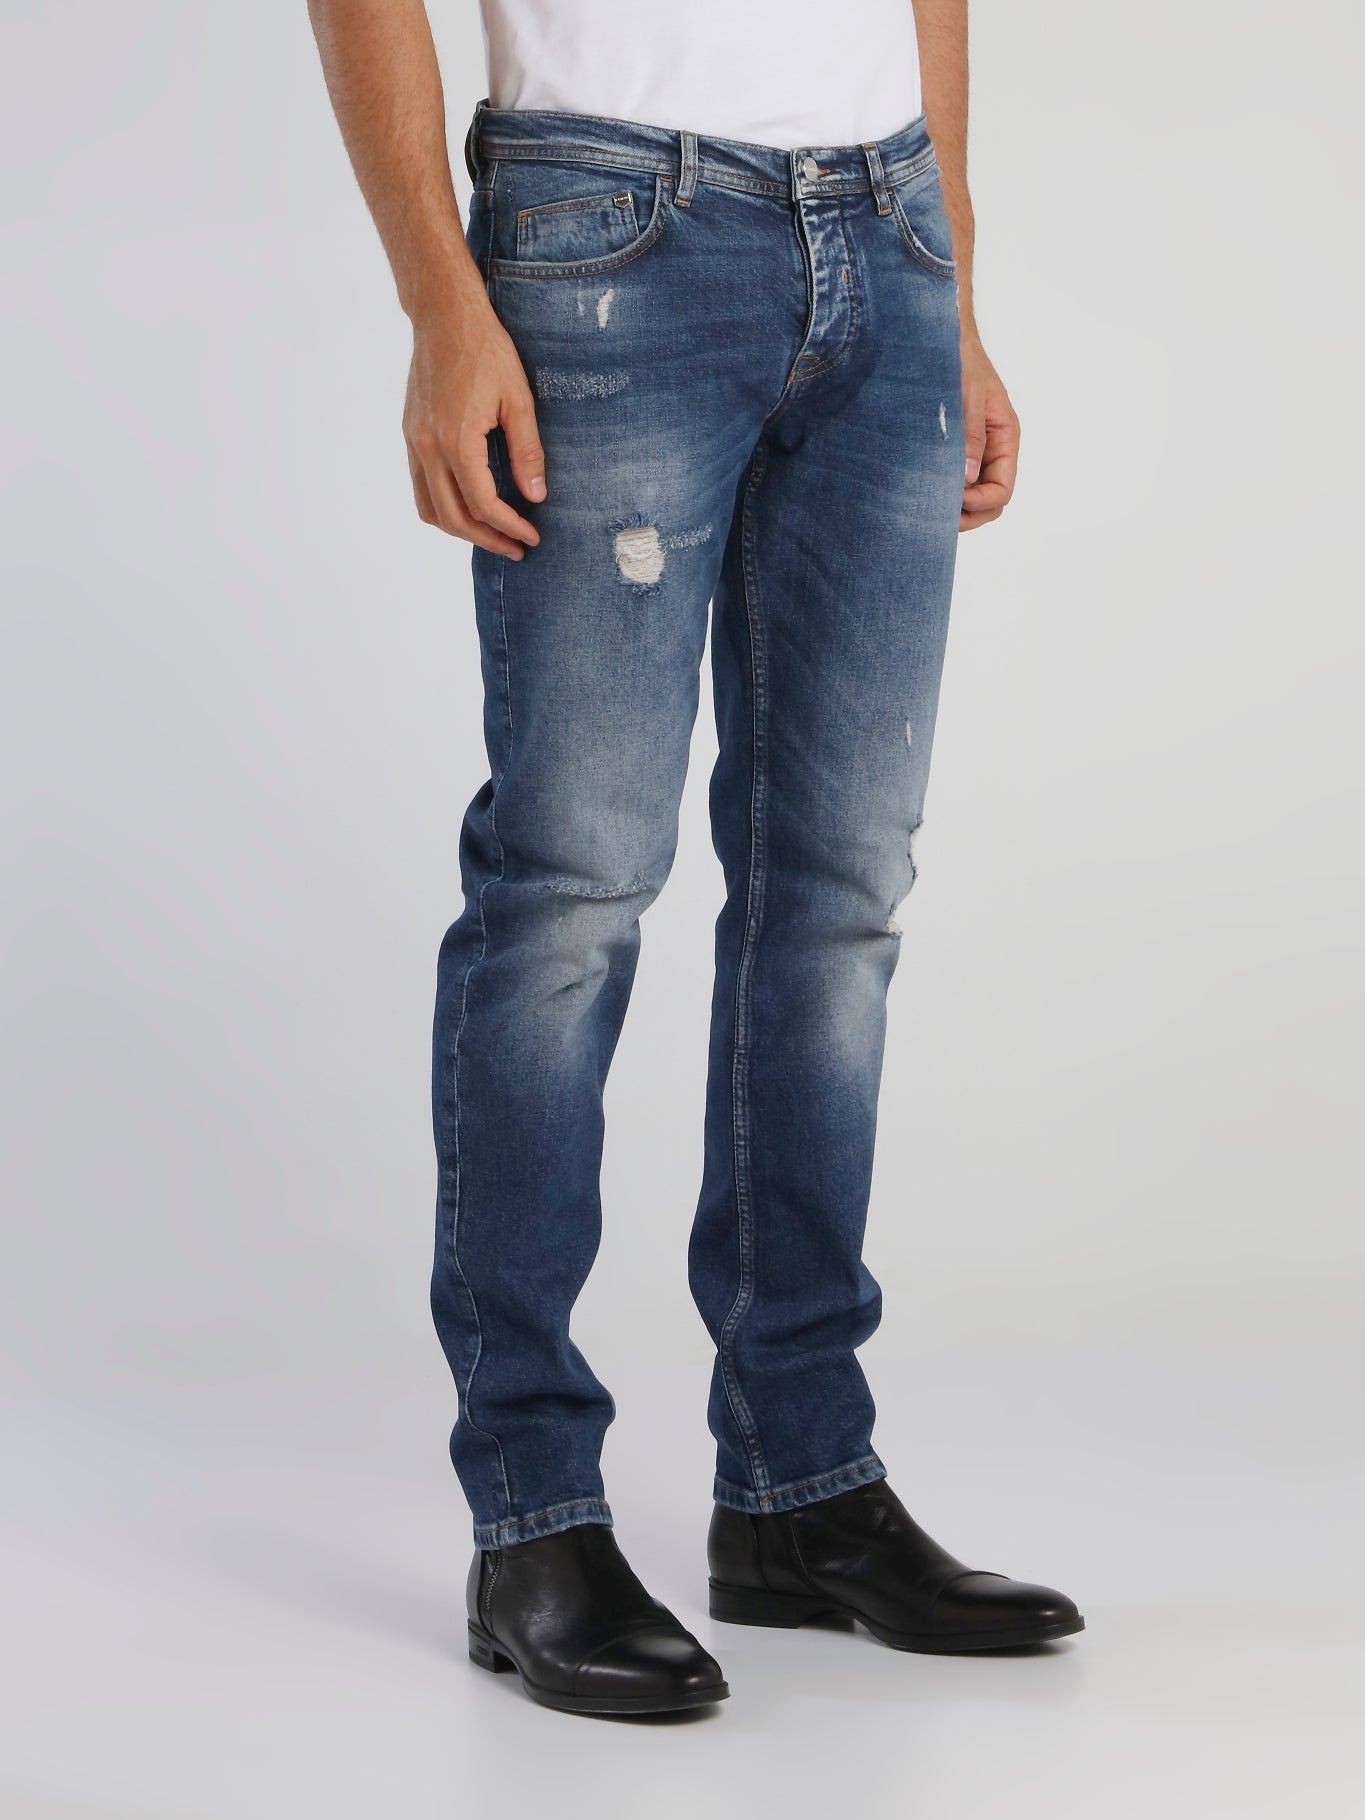 Distressed Tapered Cut Jeans